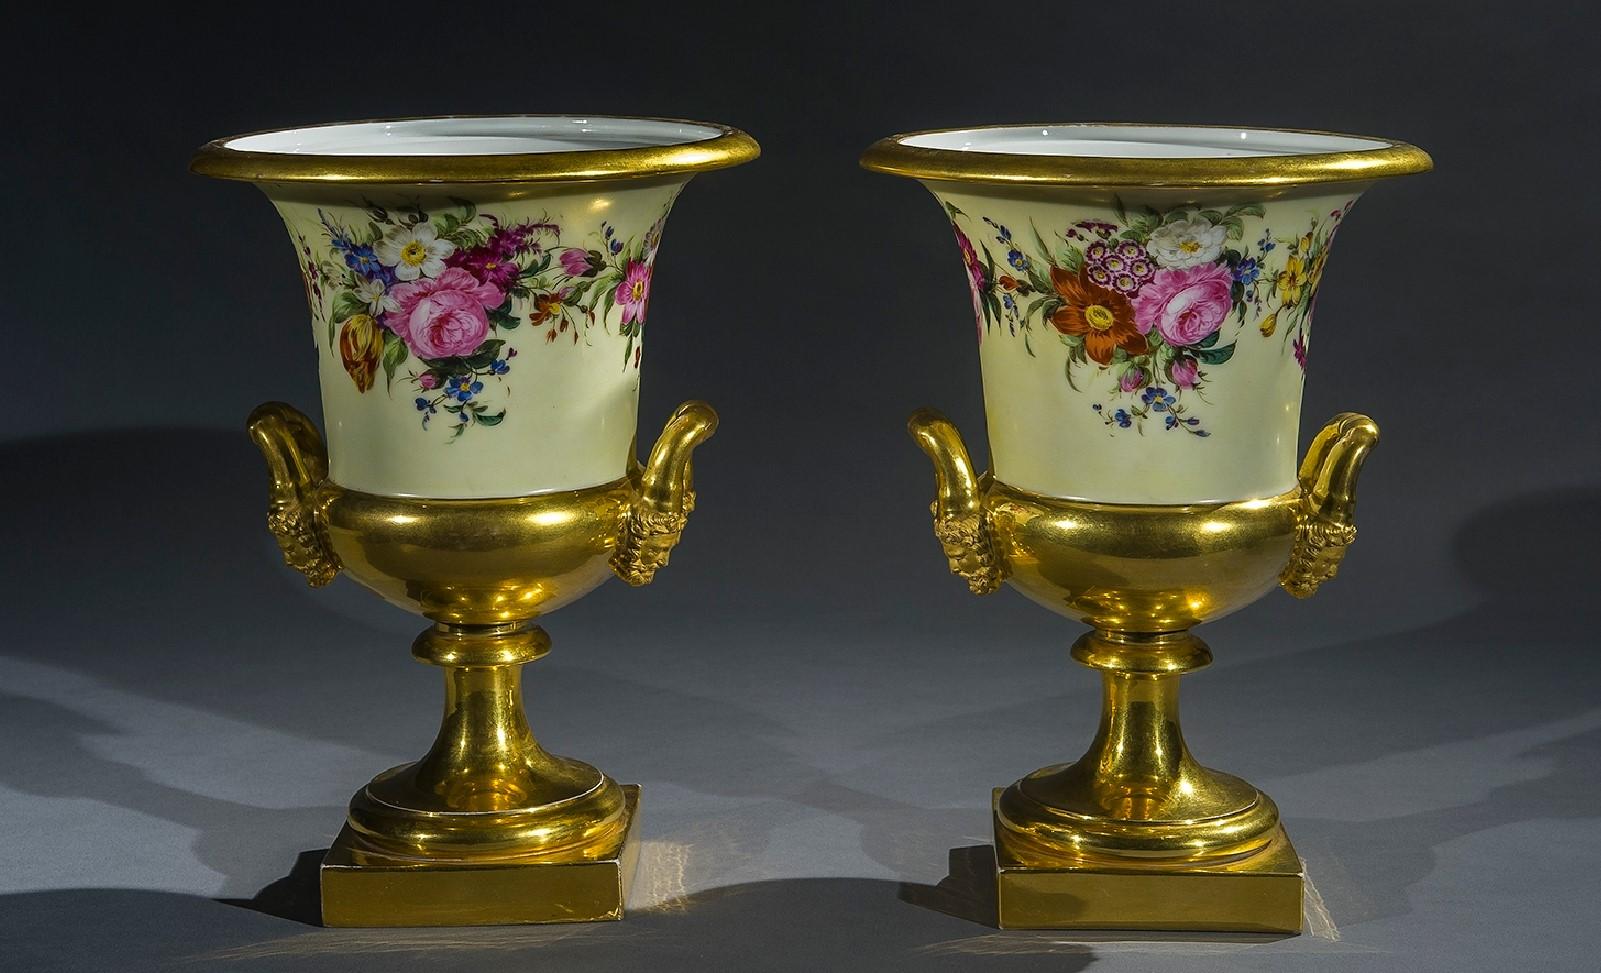 Attributed to Schoelcher, Paris, France, circa 1830.
Porcelain, painted and gilded.
16 1/4 in. high, 9 1/2 in. wide, 9 1/2 in. deep.

Ex Coll.: by repute, Joseph Bonaparte, “Point Breeze,” Bordentown, New Jersey; Mrs. Harry Horton Benkard, Oyster